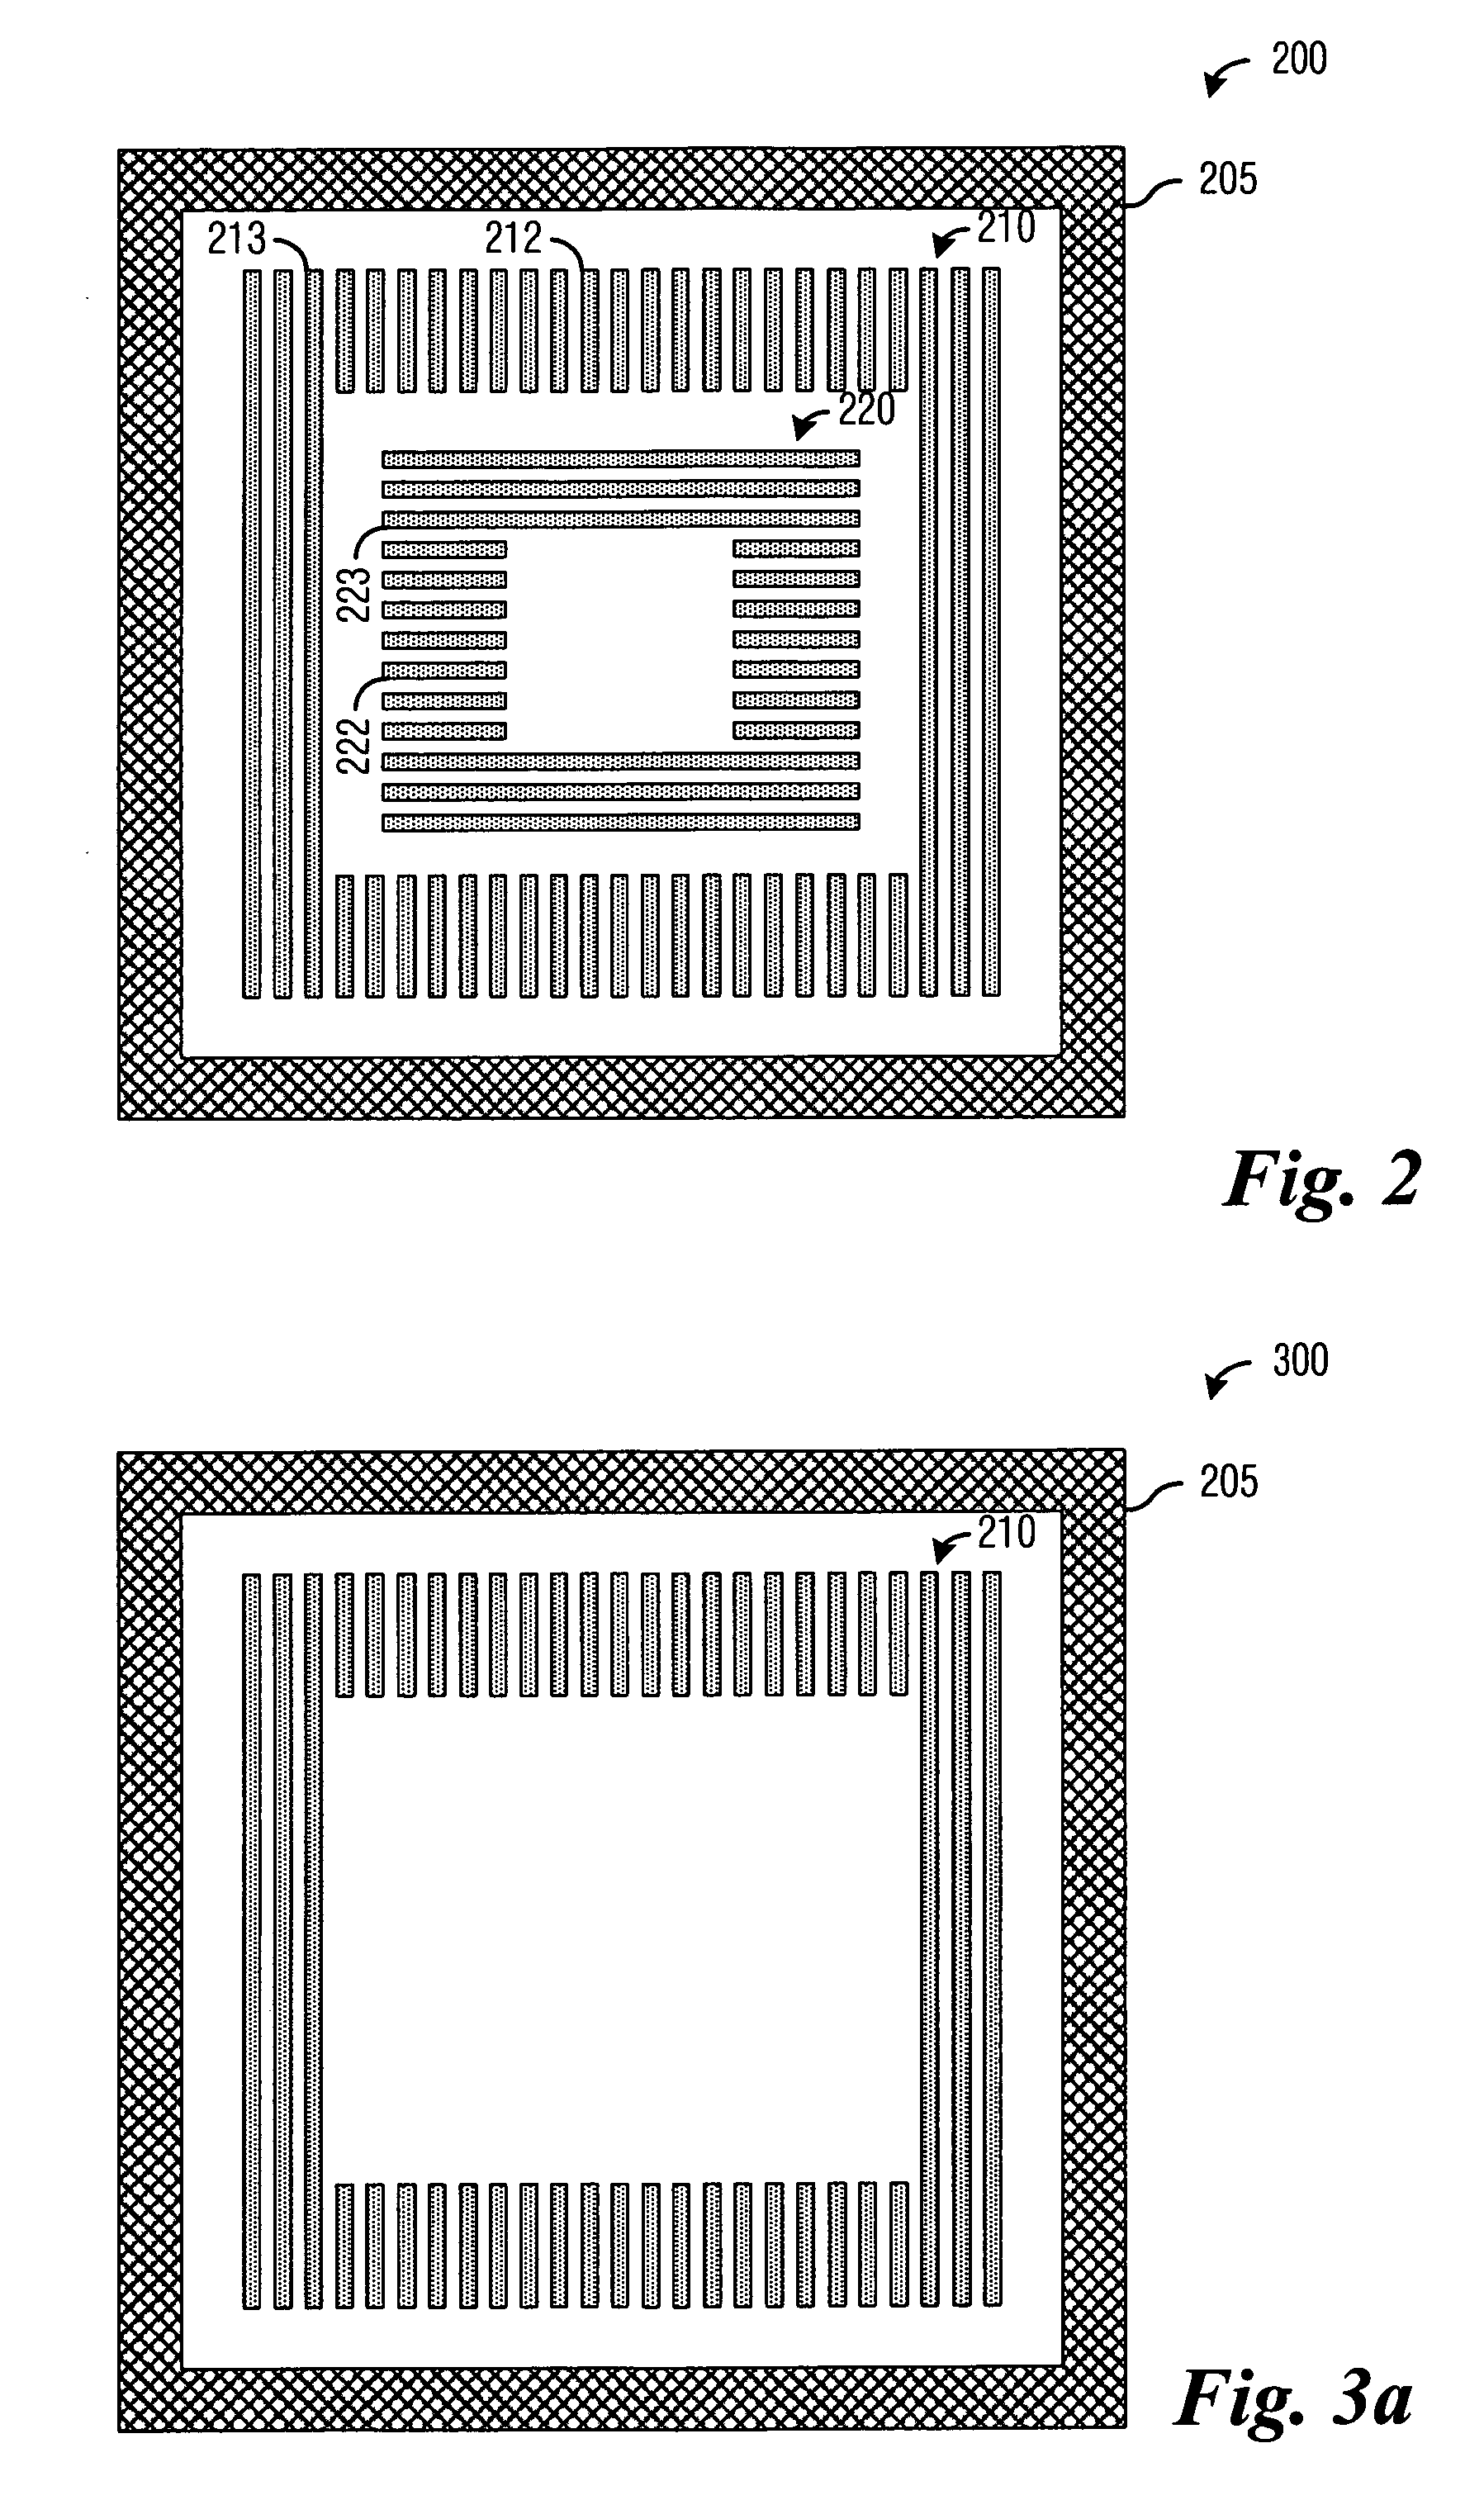 Overlay target for polarized light lithography